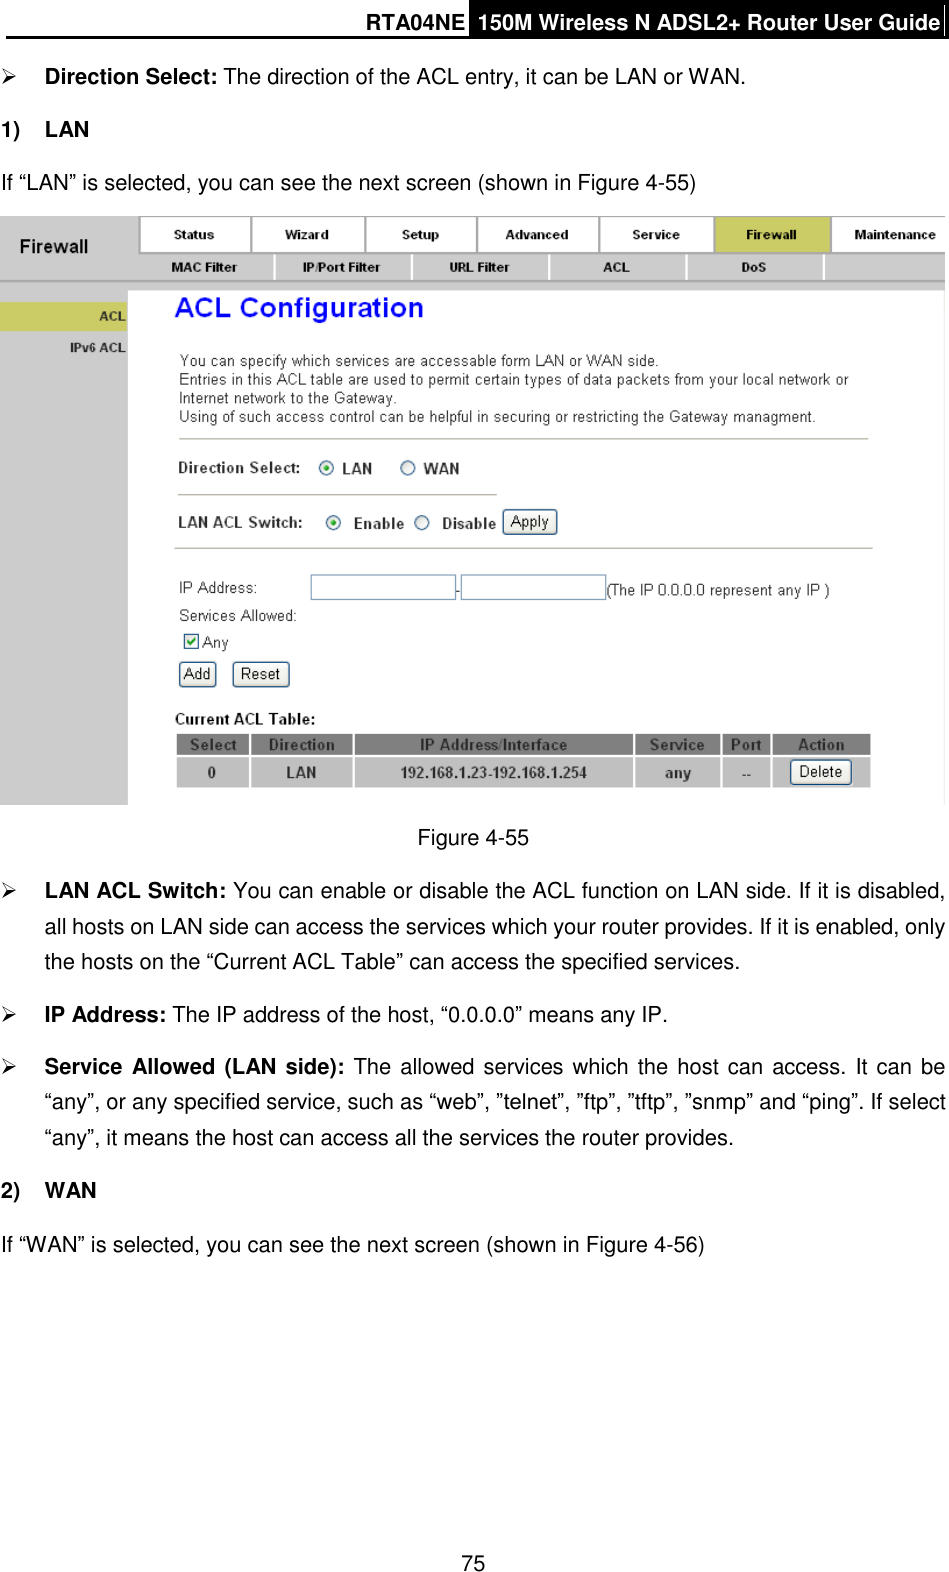 RTA04NE 150M Wireless N ADSL2+ Router User Guide  75  Direction Select: The direction of the ACL entry, it can be LAN or WAN.   1)  LAN If “LAN” is selected, you can see the next screen (shown in Figure 4-55)    Figure 4-55  LAN ACL Switch: You can enable or disable the ACL function on LAN side. If it is disabled, all hosts on LAN side can access the services which your router provides. If it is enabled, only the hosts on the “Current ACL Table” can access the specified services.  IP Address: The IP address of the host, “0.0.0.0” means any IP.  Service Allowed (LAN side): The allowed services which the host can access. It can be “any”, or any specified service, such as “web”, ”telnet”, ”ftp”, ”tftp”, ”snmp” and “ping”. If select “any”, it means the host can access all the services the router provides. 2)  WAN If “WAN” is selected, you can see the next screen (shown in Figure 4-56)   